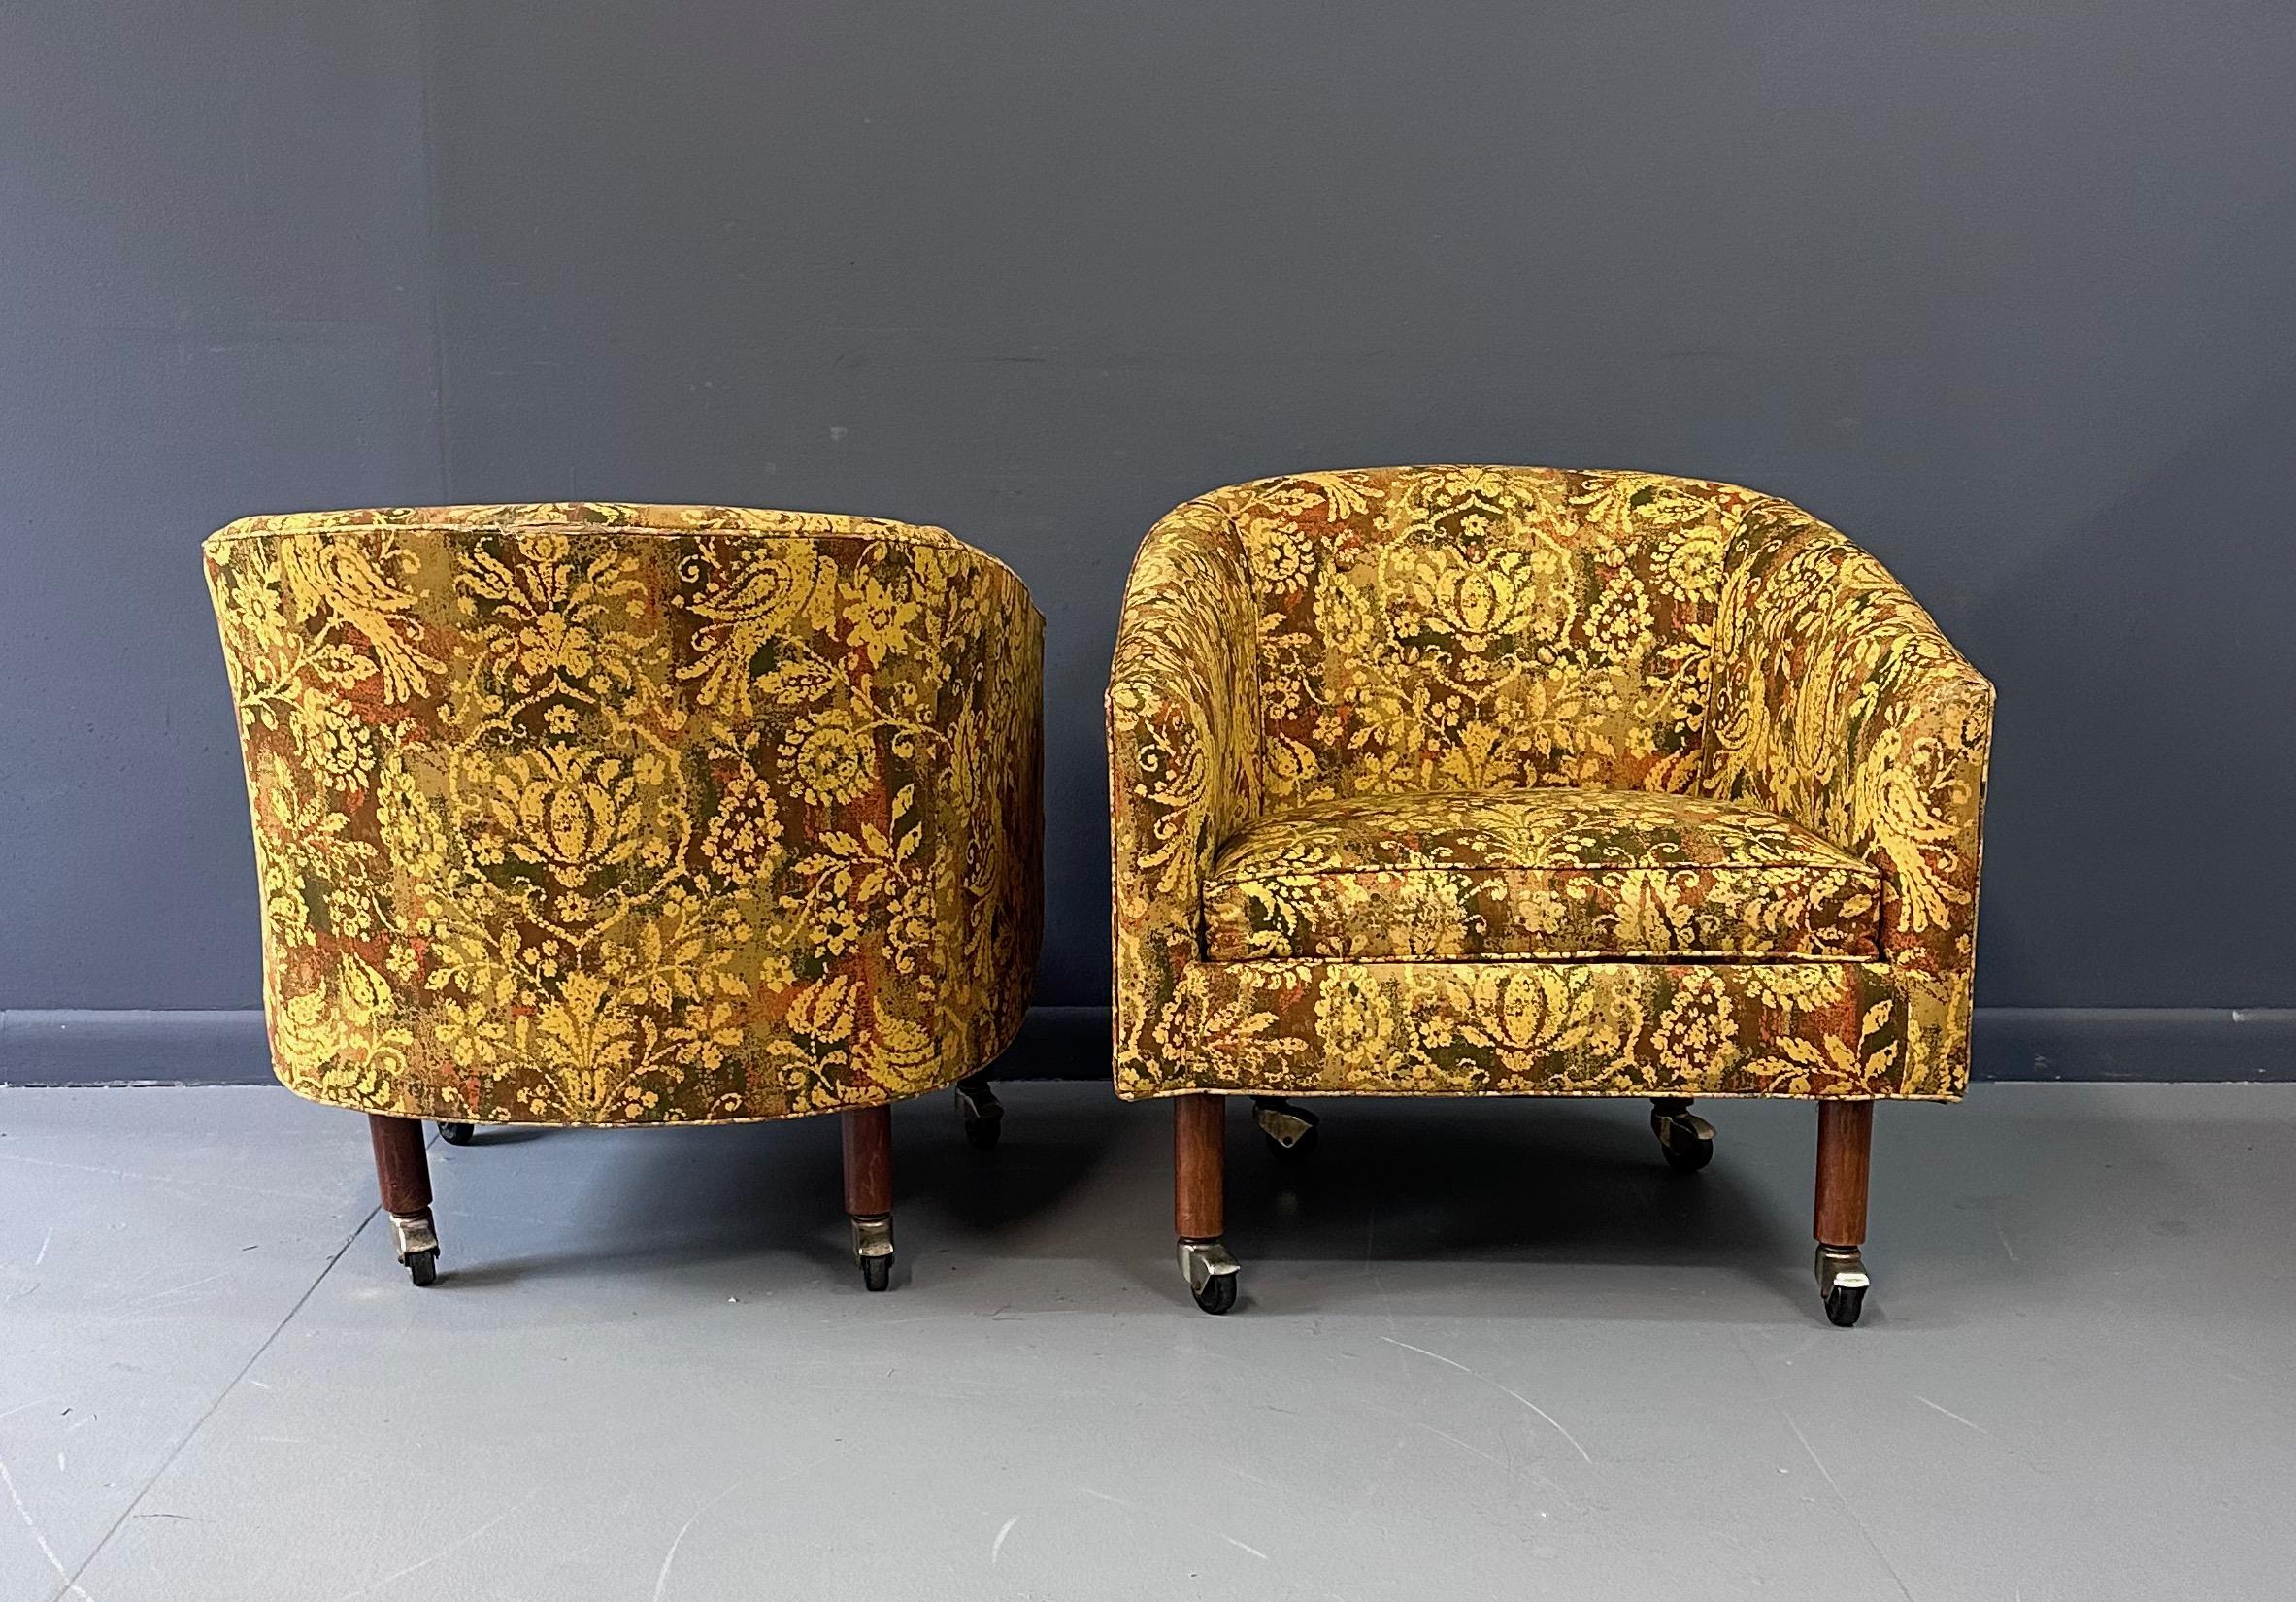 20th Century Pair of Century Furniture Cos Barrel Back Chairs with Walnut Legs and Casters For Sale